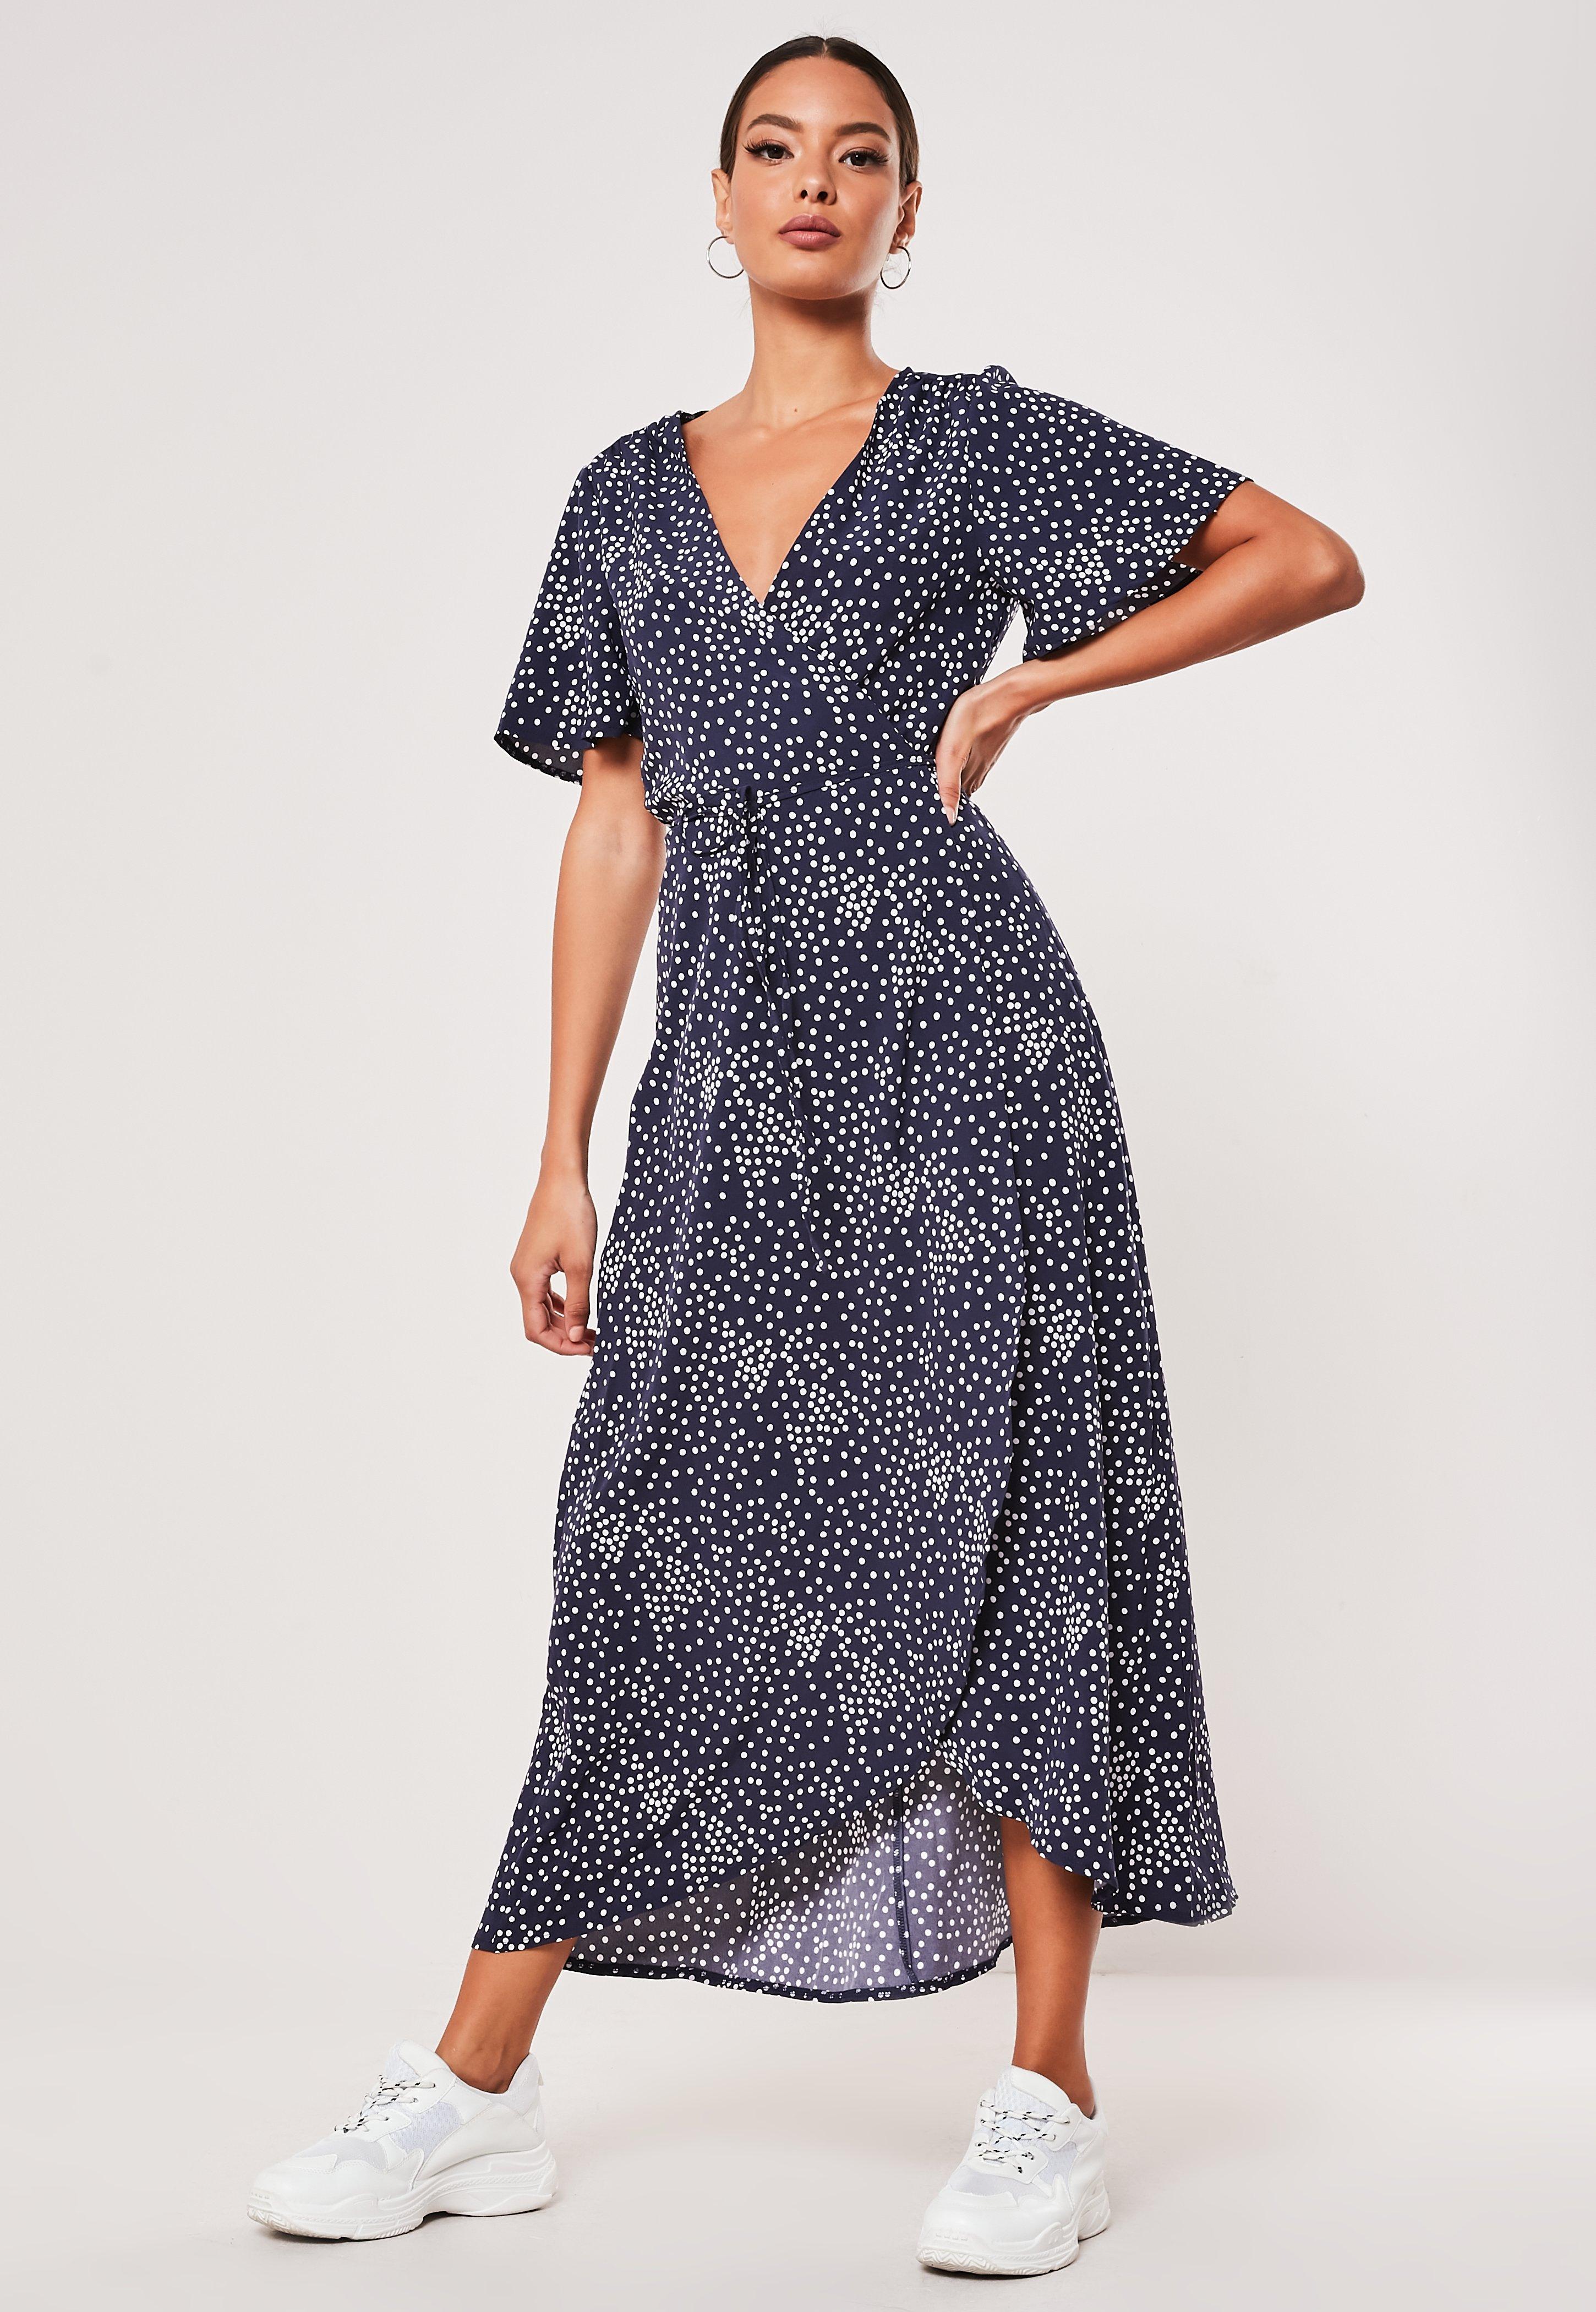 Missguided Synthetic Petite Navy Polka Dot High Low Wrap Midi Dress in ...